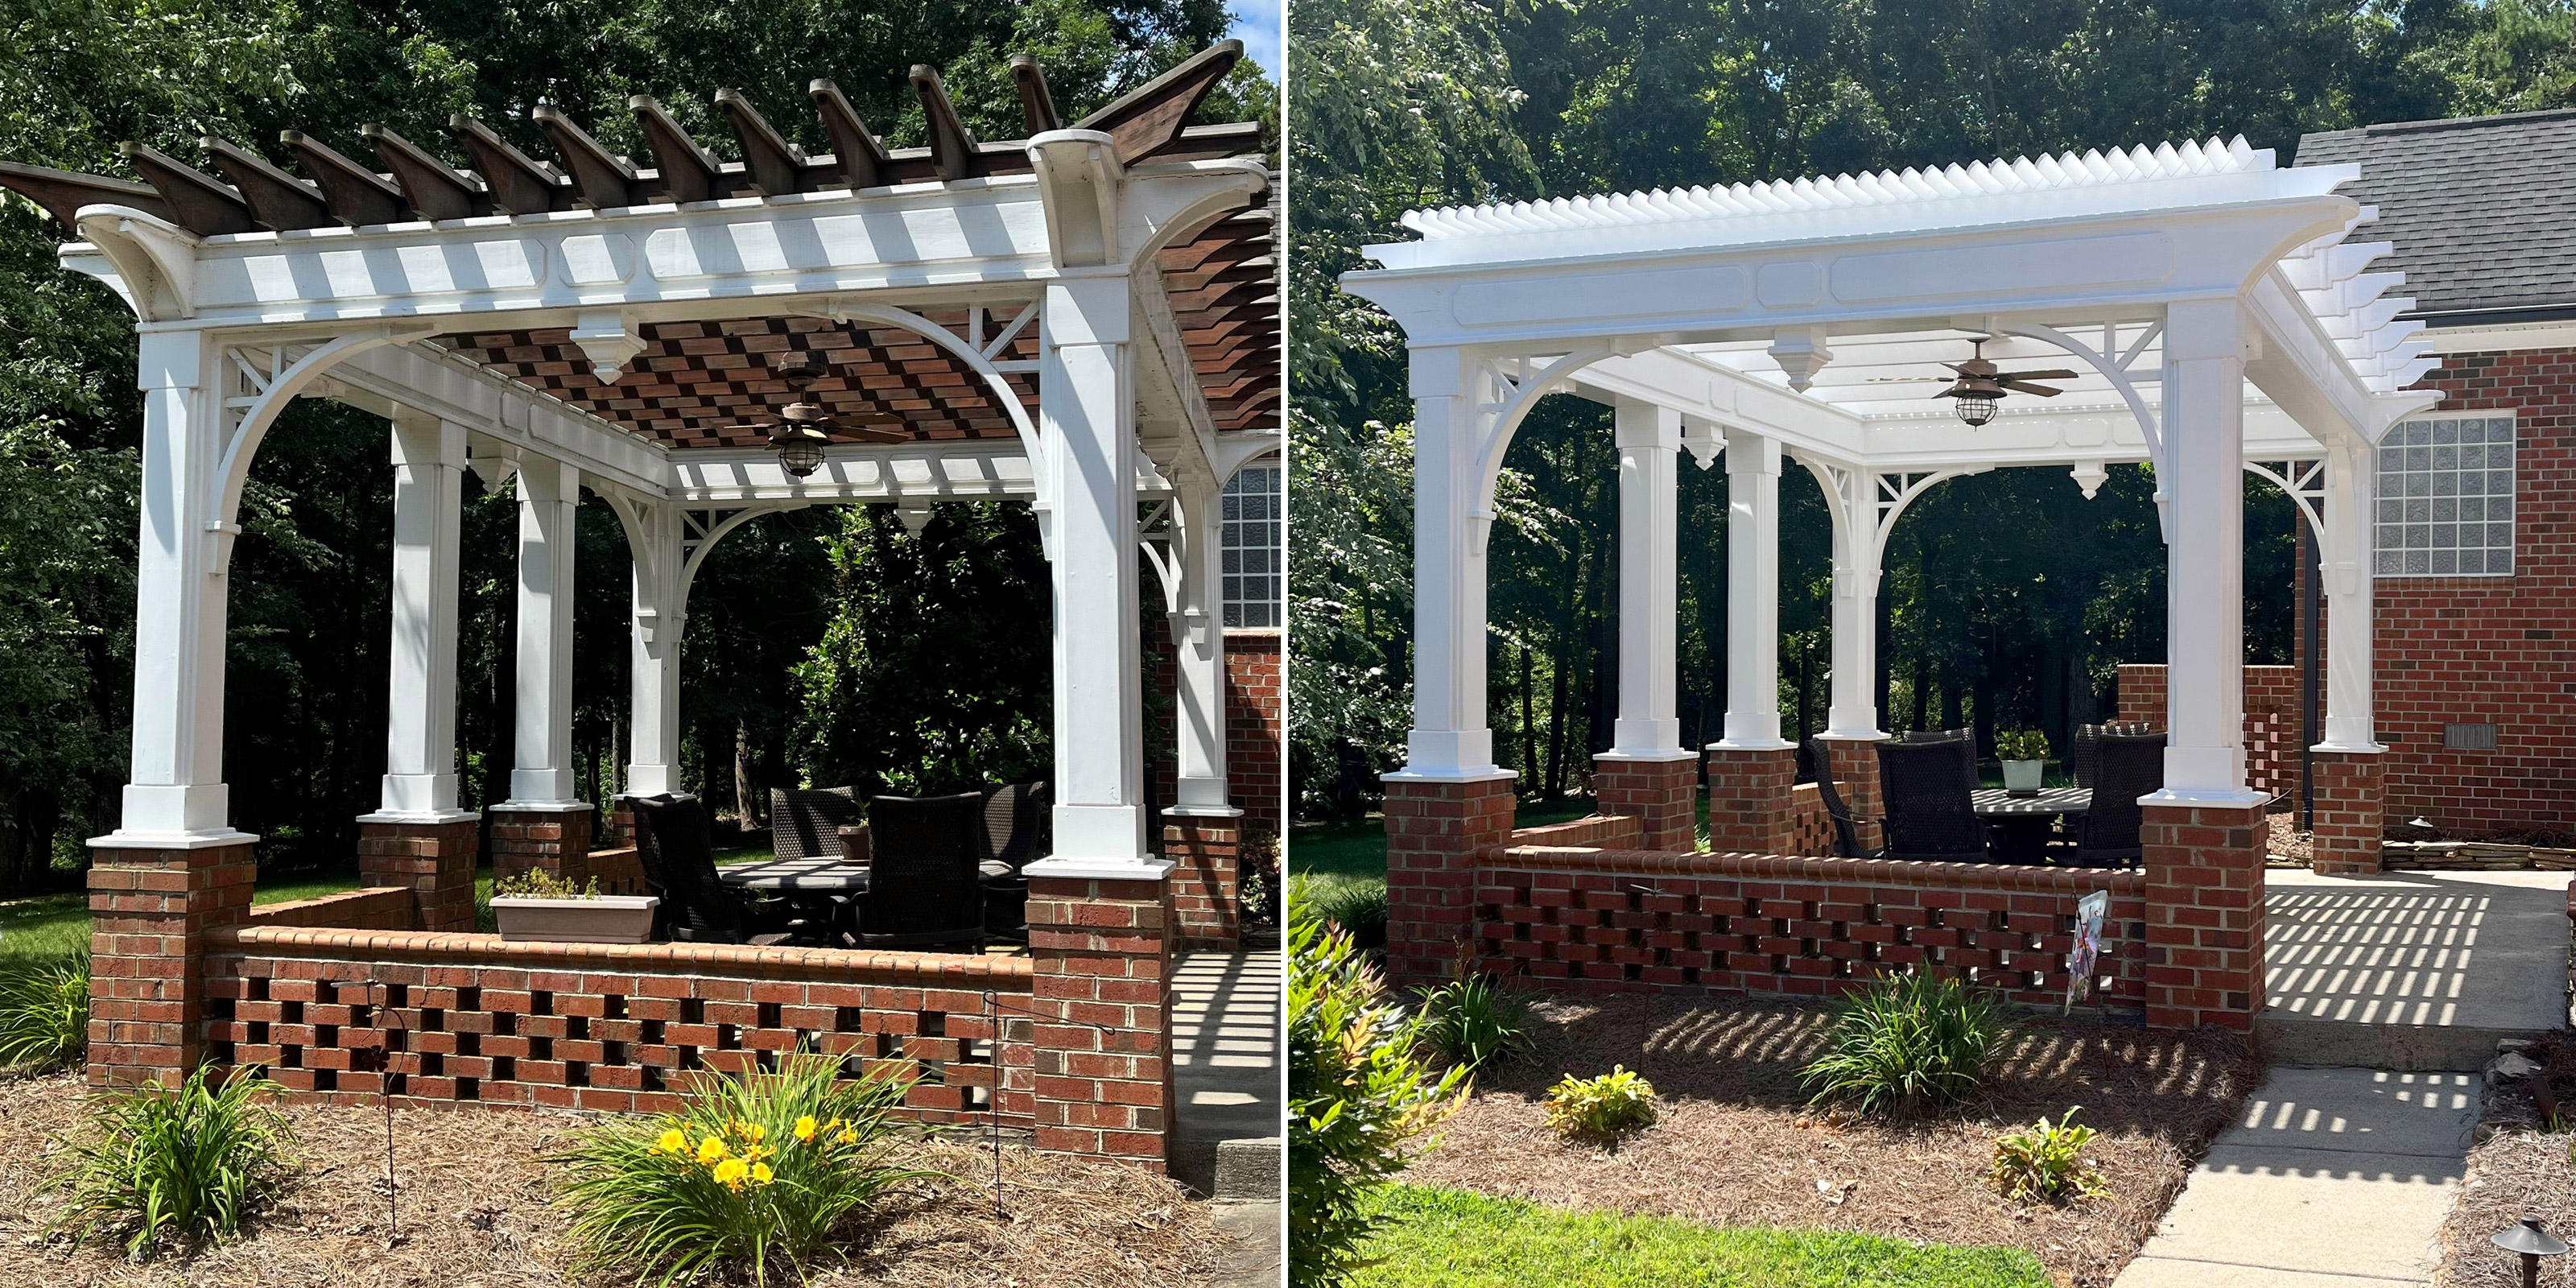 Before and after photo of all wood pergola that had the roof structure removed and replaced with an angled vinyl roof system